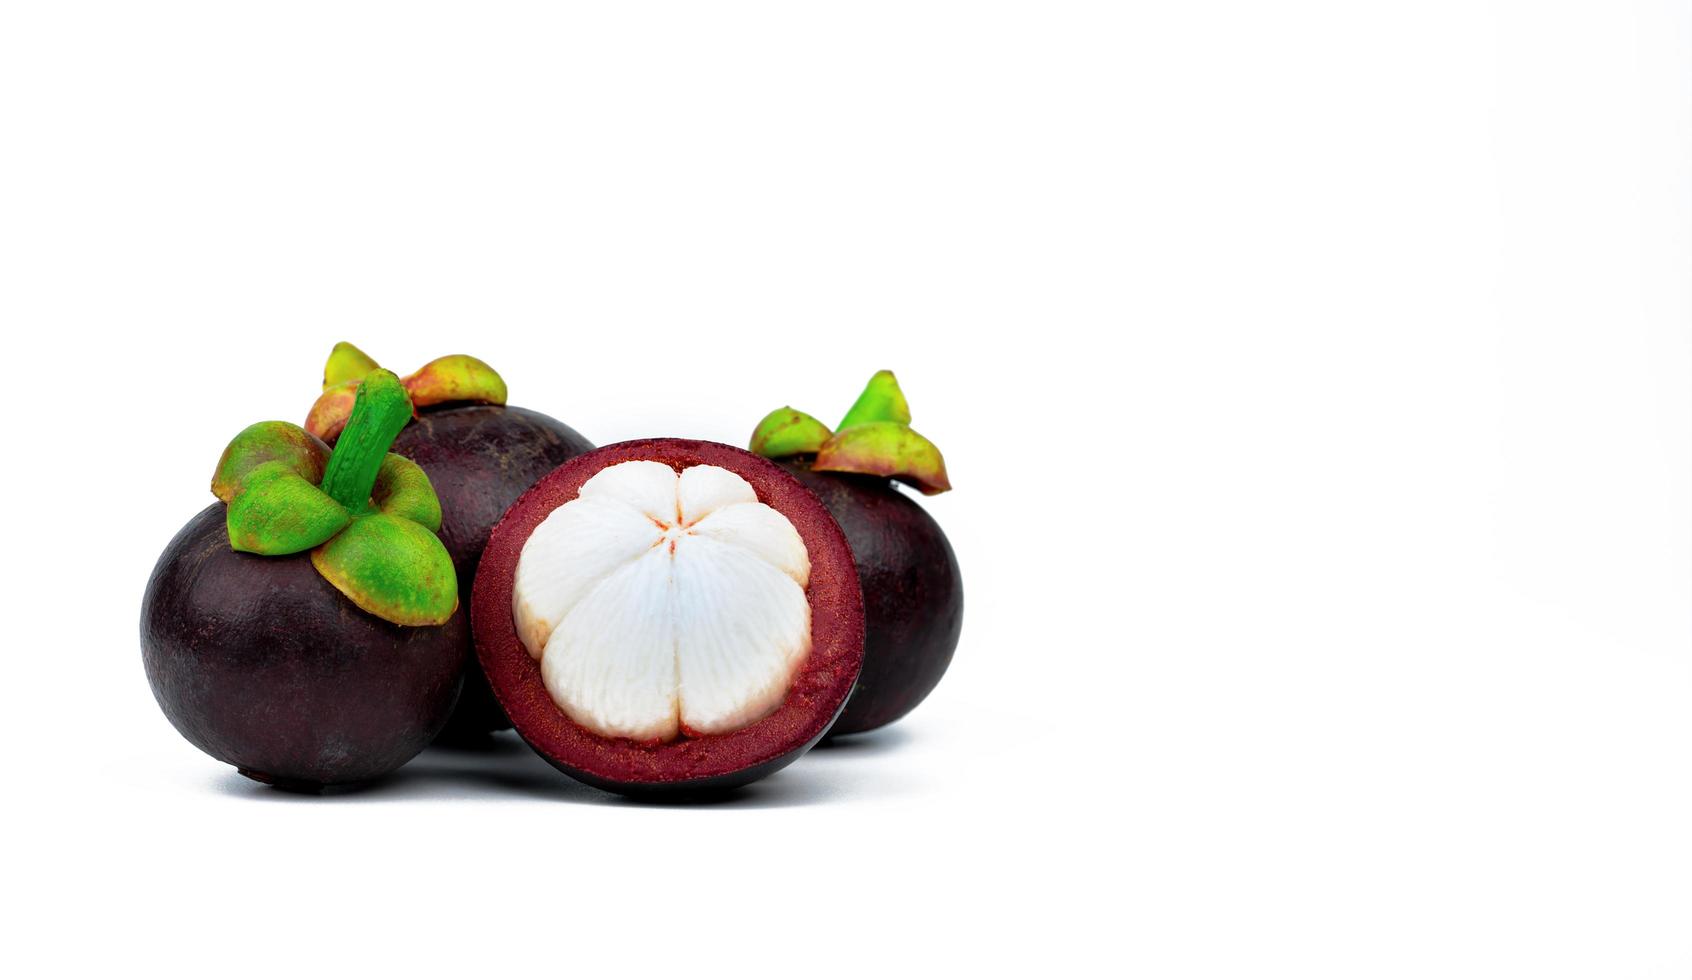 Three whole purple mangosteen and another cross section isolated on white background. Tropical fruit from Thailand. The queen of fruits. Asia fresh fruit market. Natural source of tannin and xanthones photo